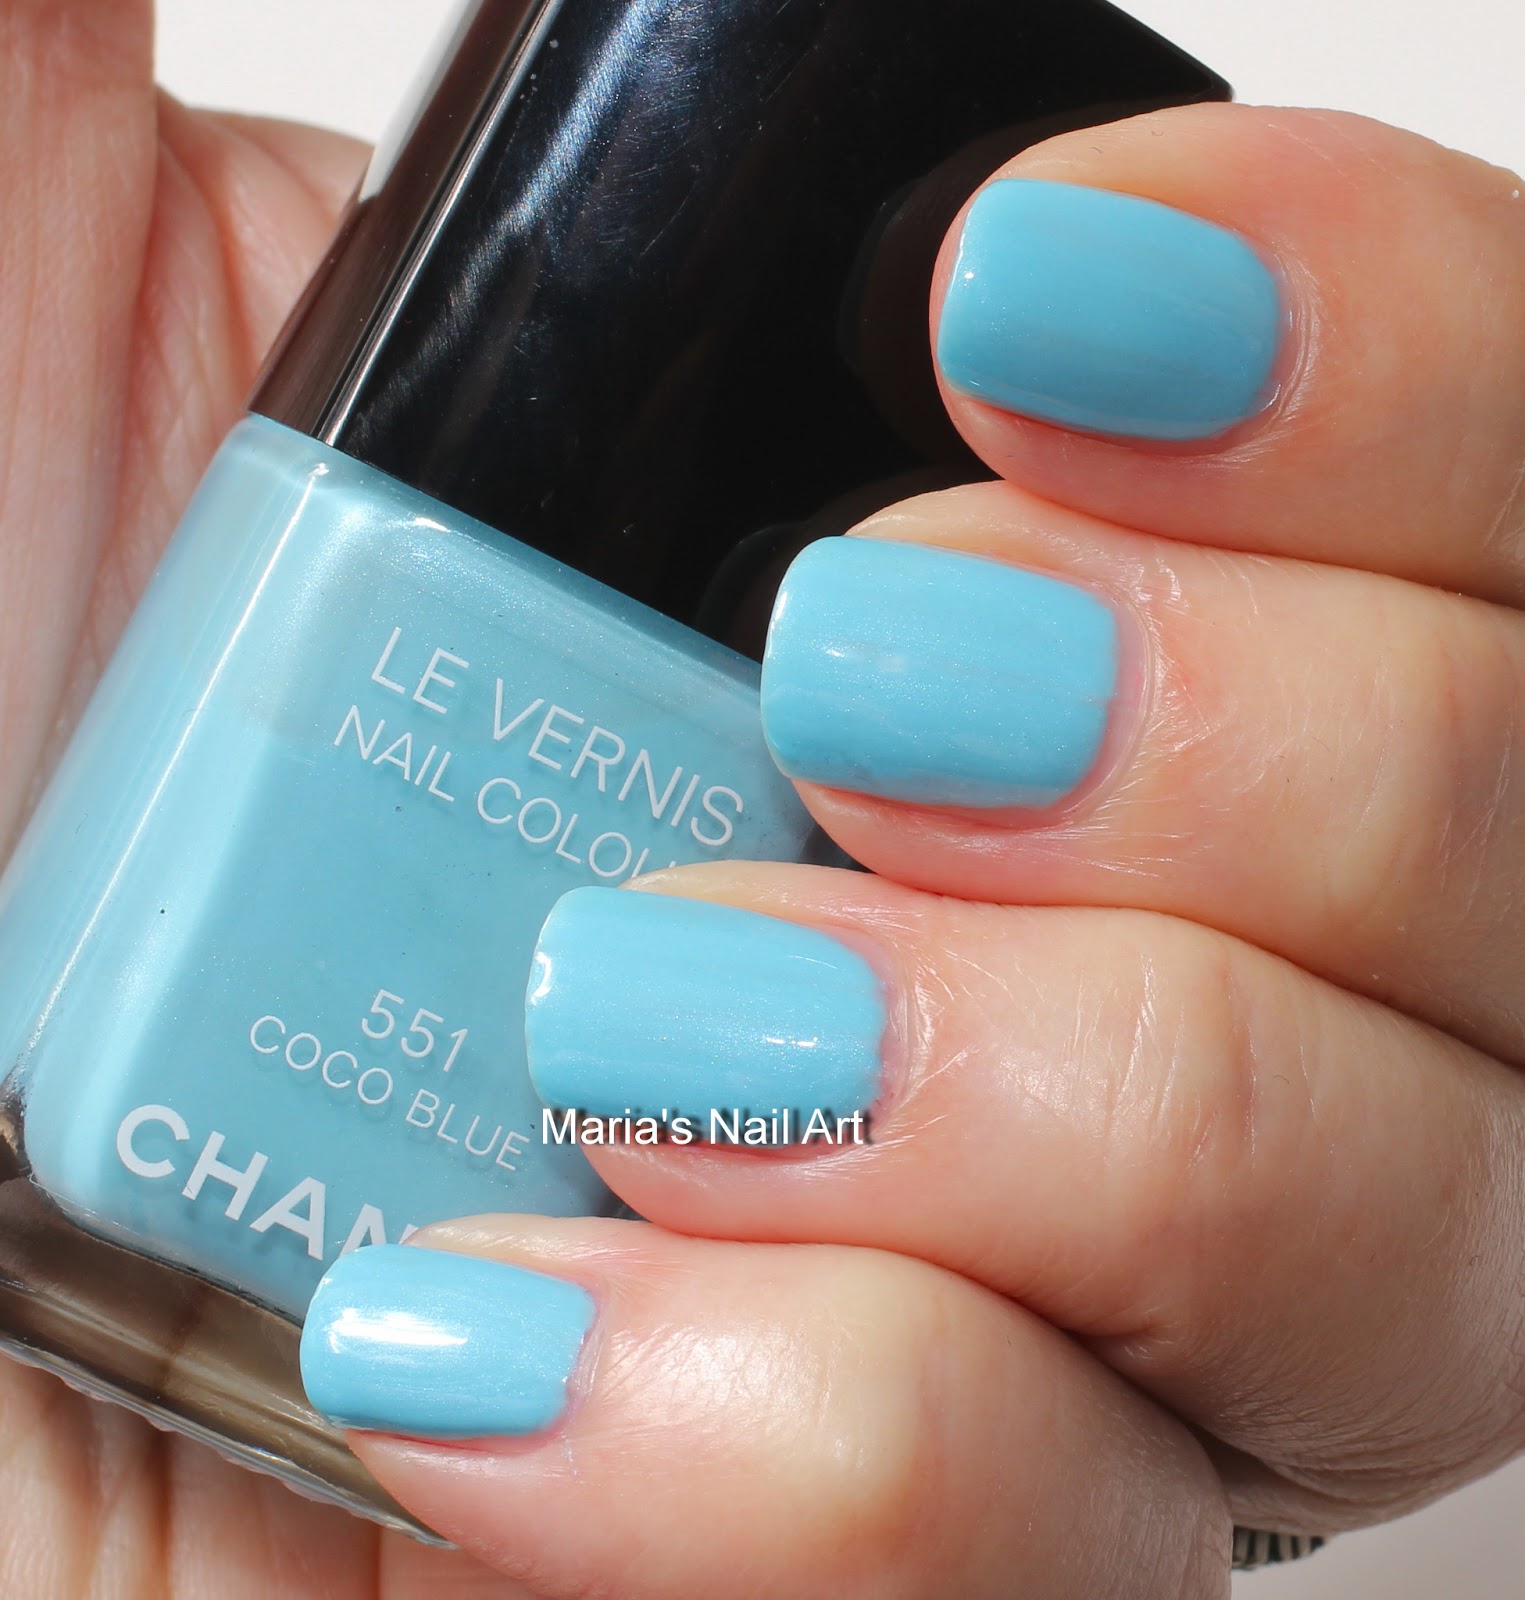 Marias Nail Art Polish Chanel Coco Blue 551 - Les Jeans coll. swatches - Chanel